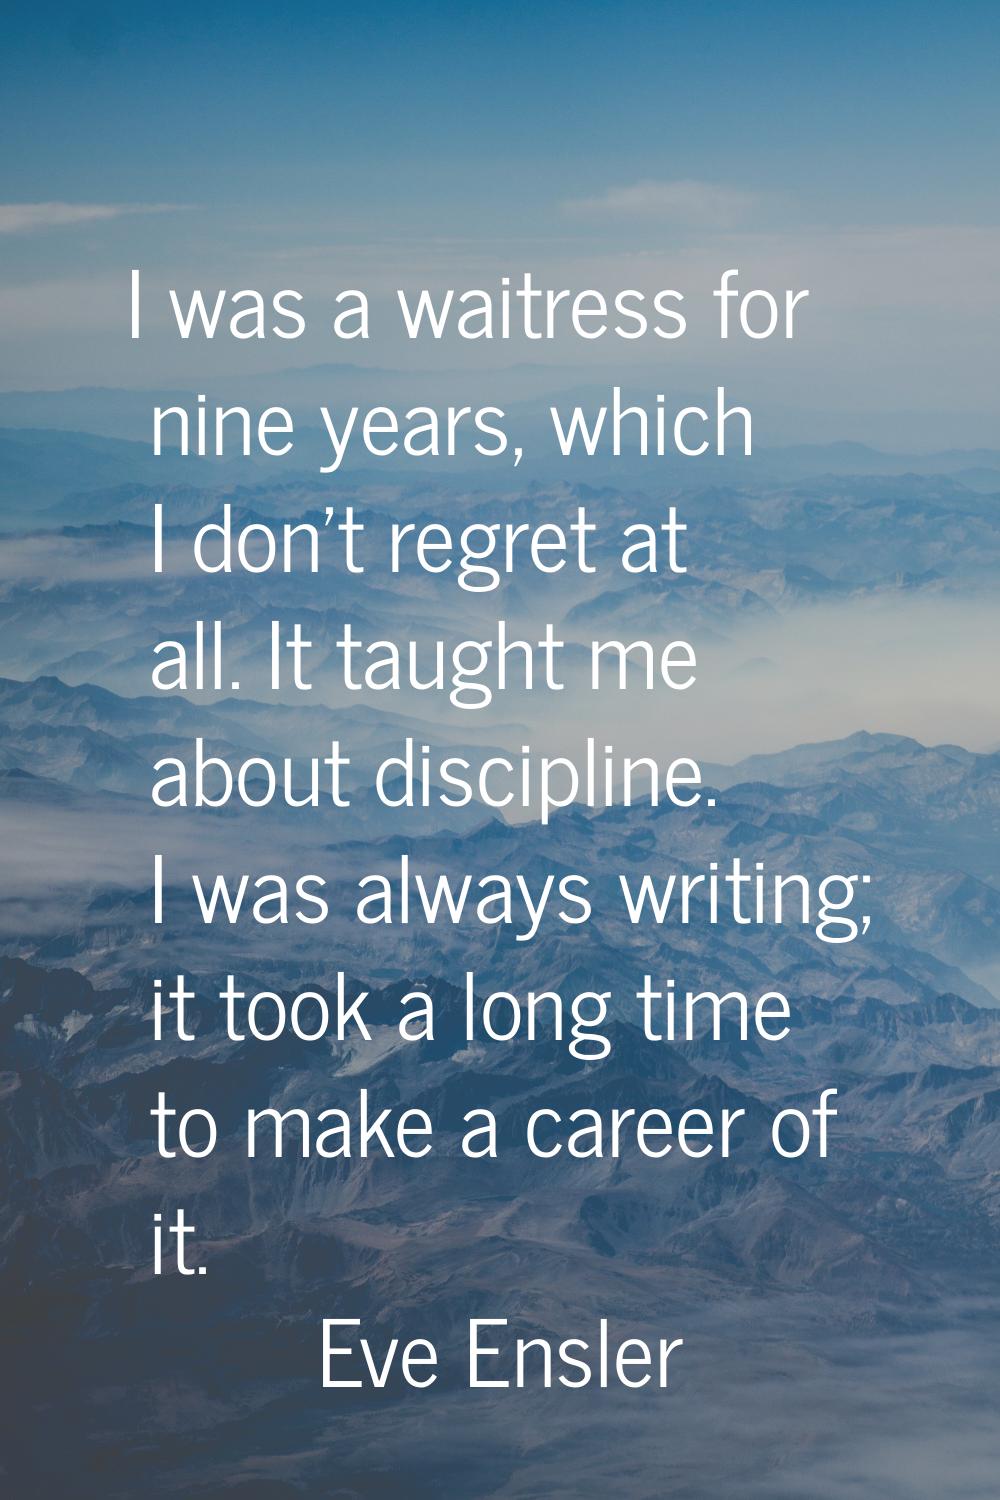 I was a waitress for nine years, which I don't regret at all. It taught me about discipline. I was 